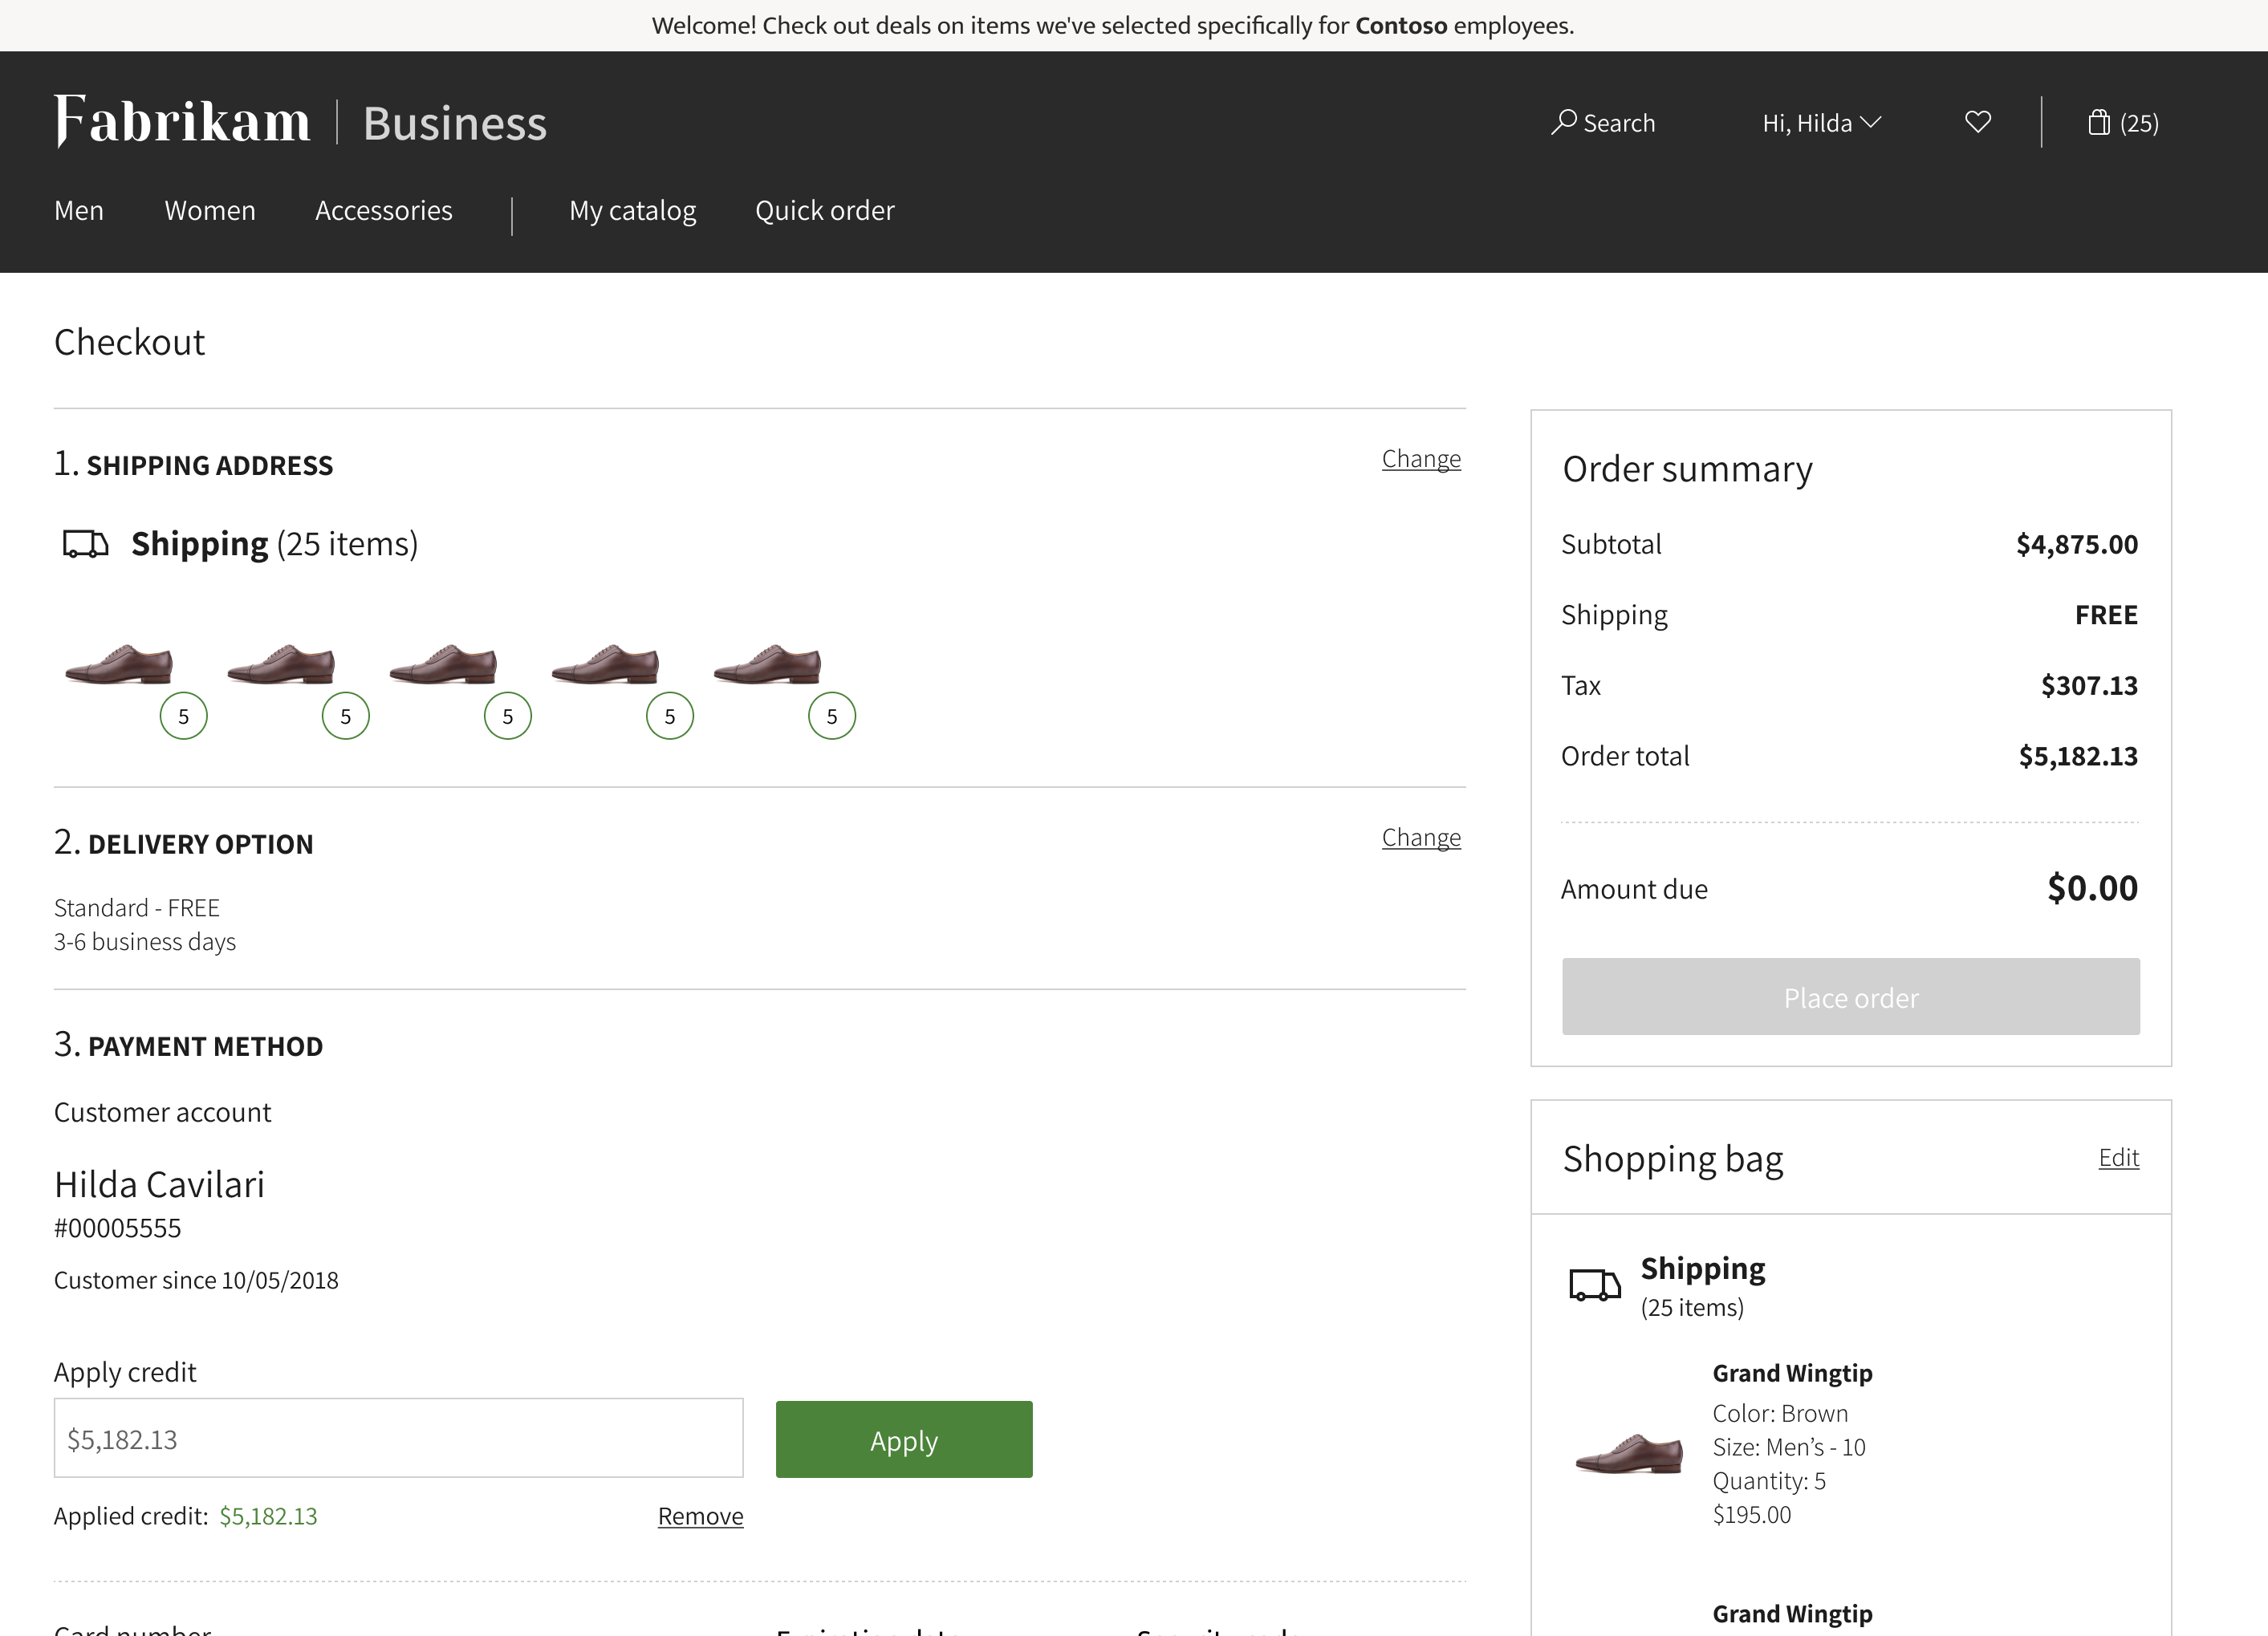 Image displaying the checkout screen for a business order including shipping details, payment method and order summary.